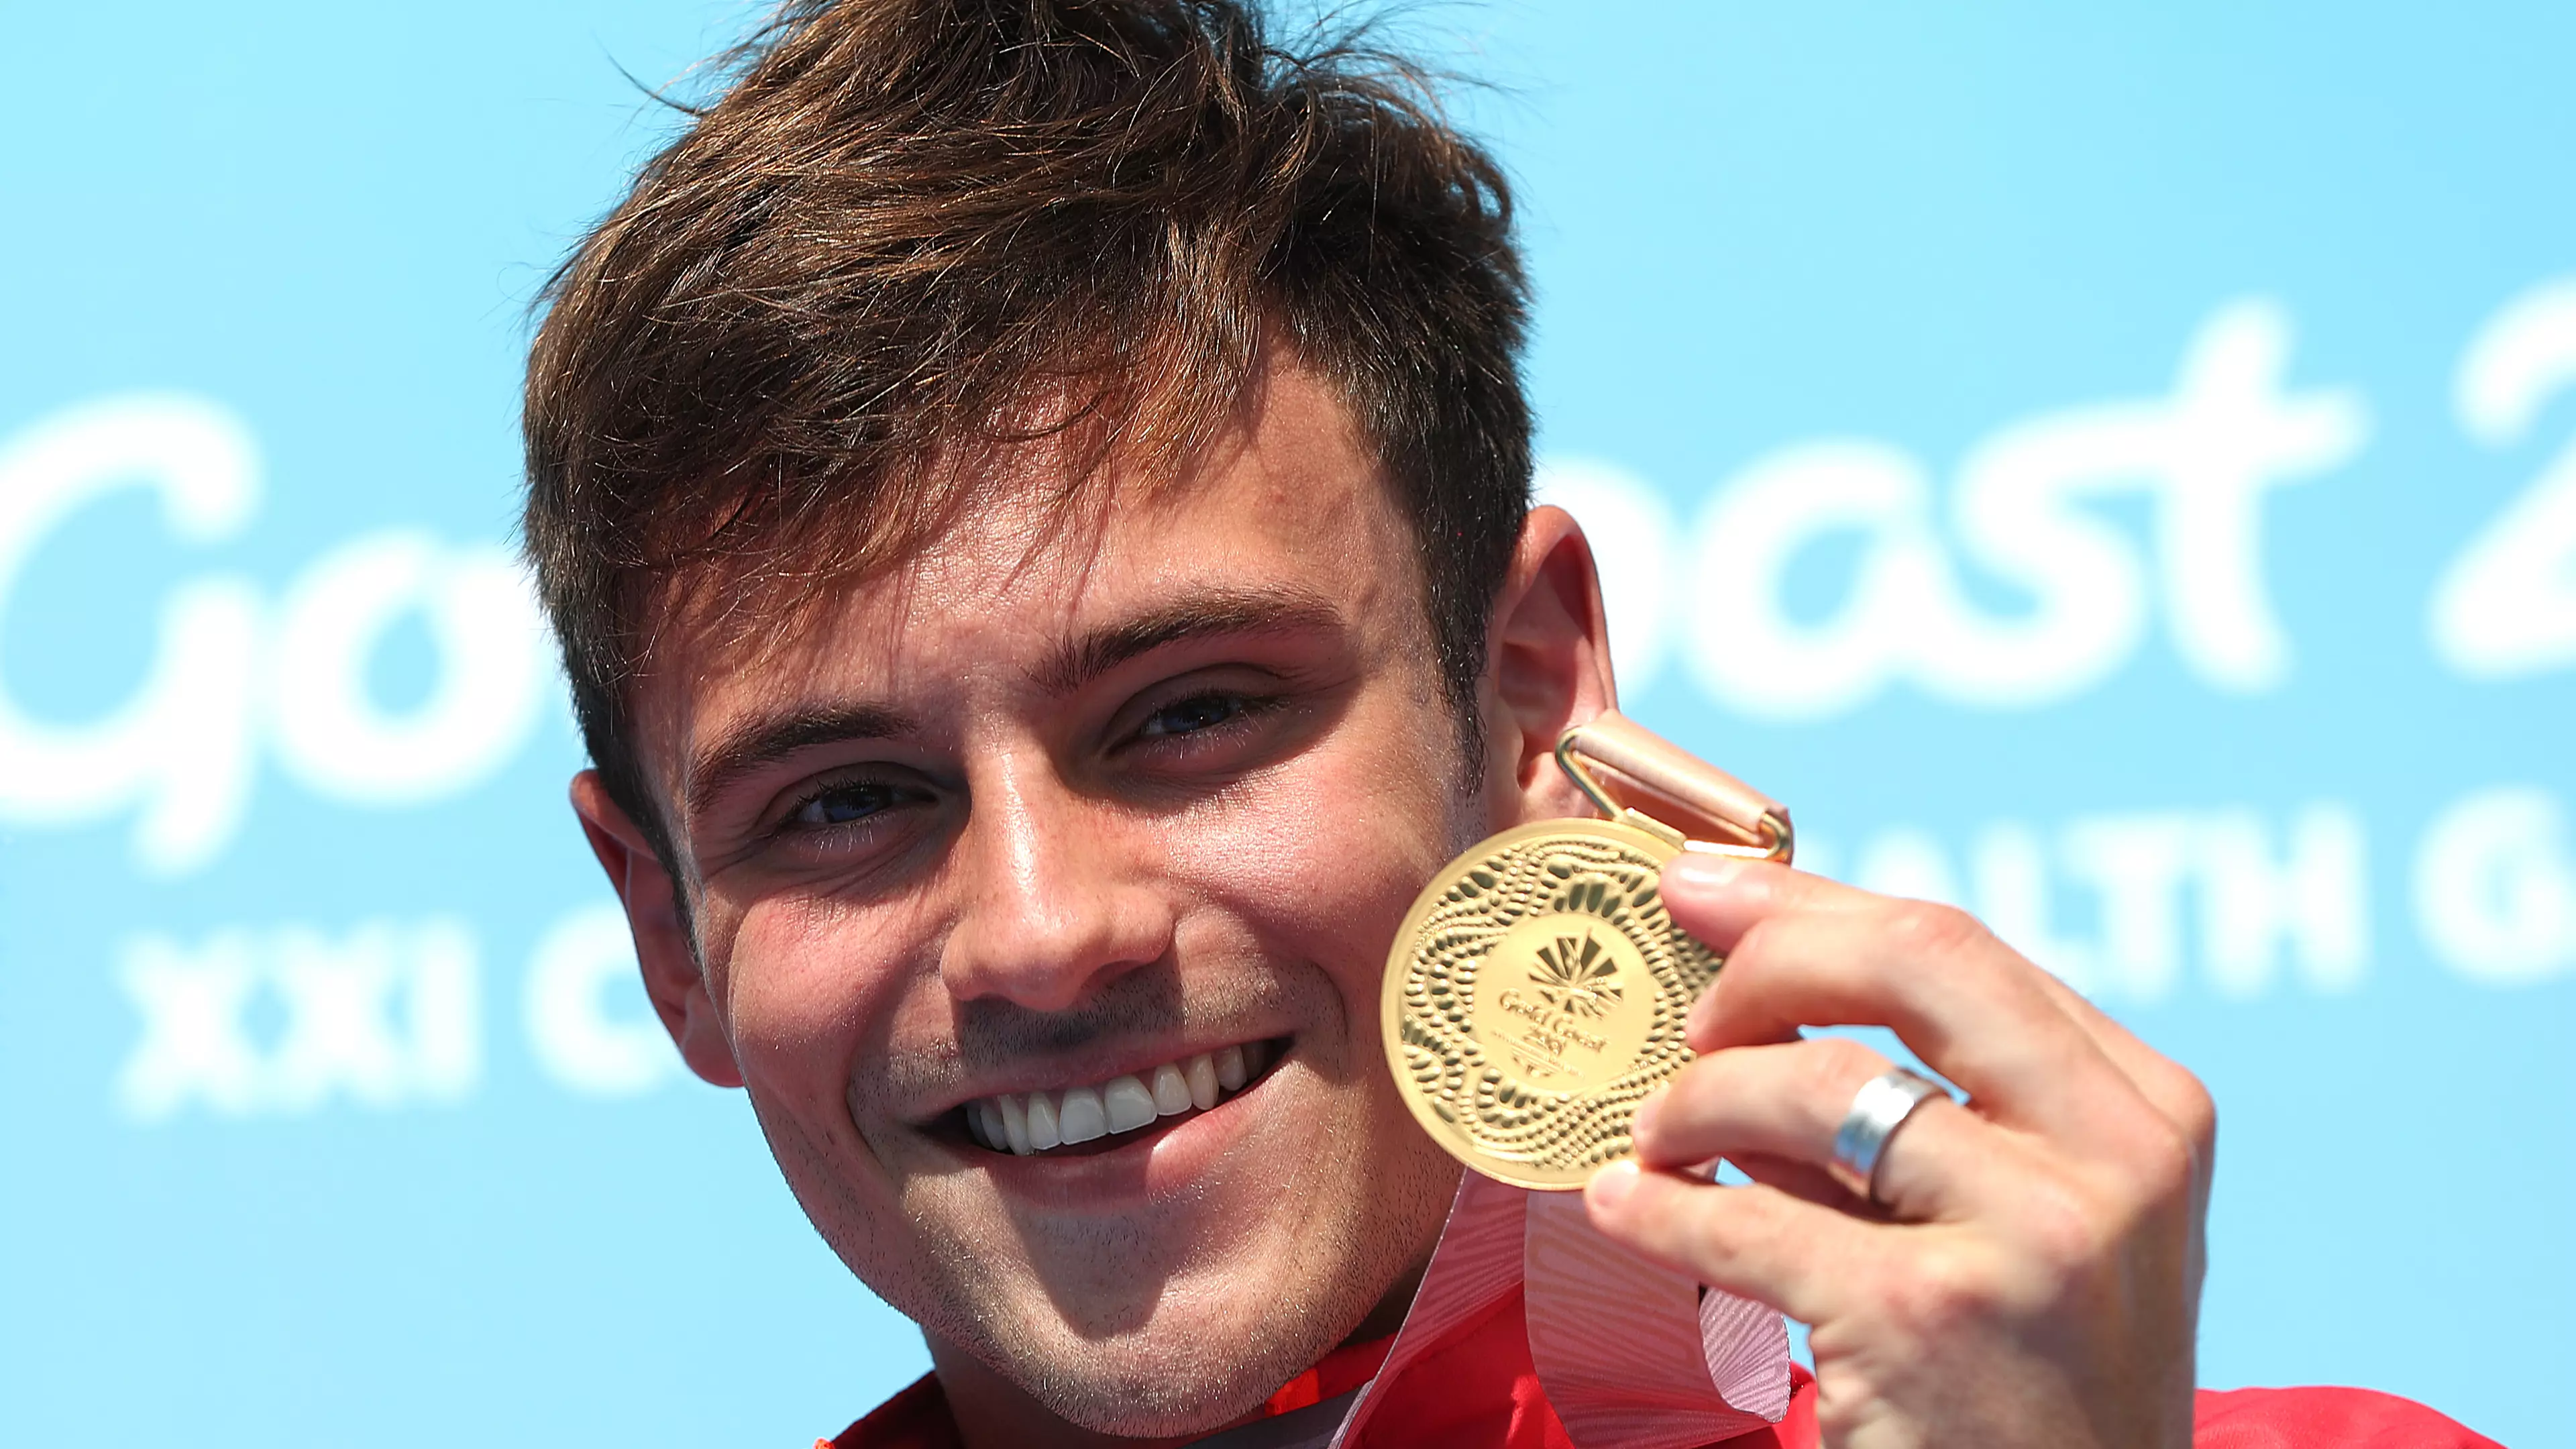 Russian State-Run TV Condemned After Attacking Tom Daley With Homophobic Insults